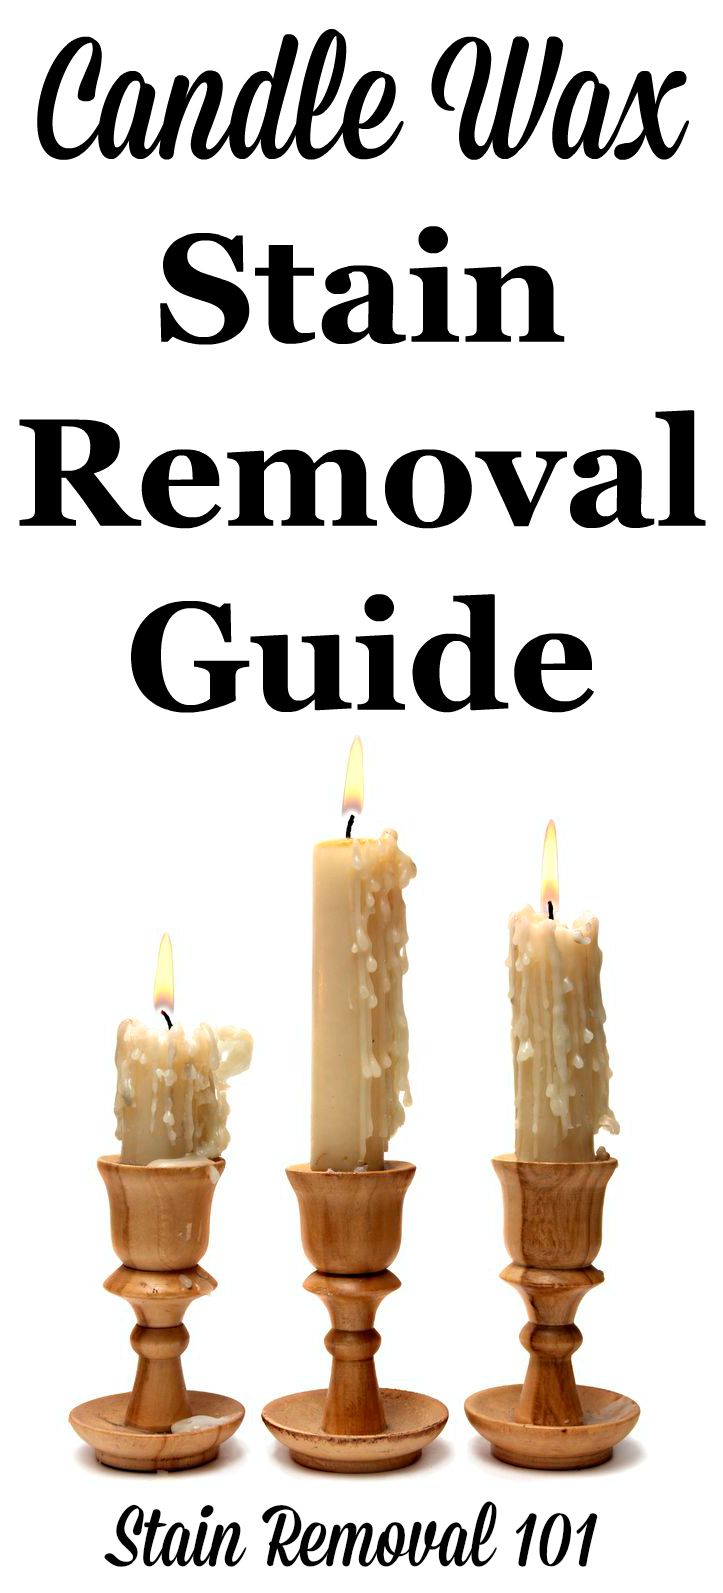 Candle Wax Stain Removal Guide